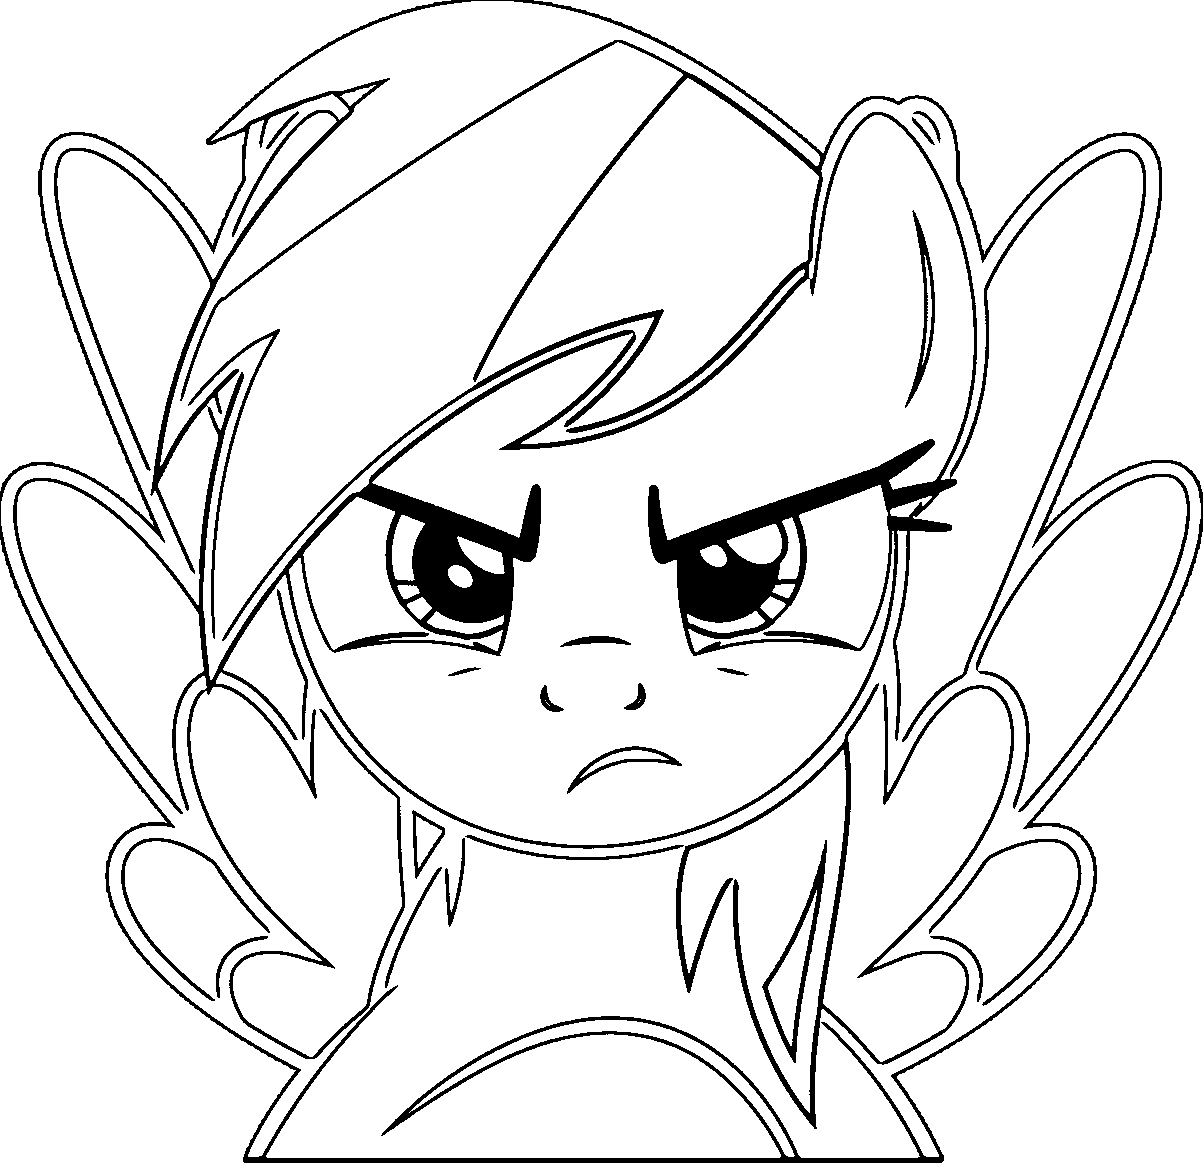 Angry Rainbow Dash MLP Coloring Page